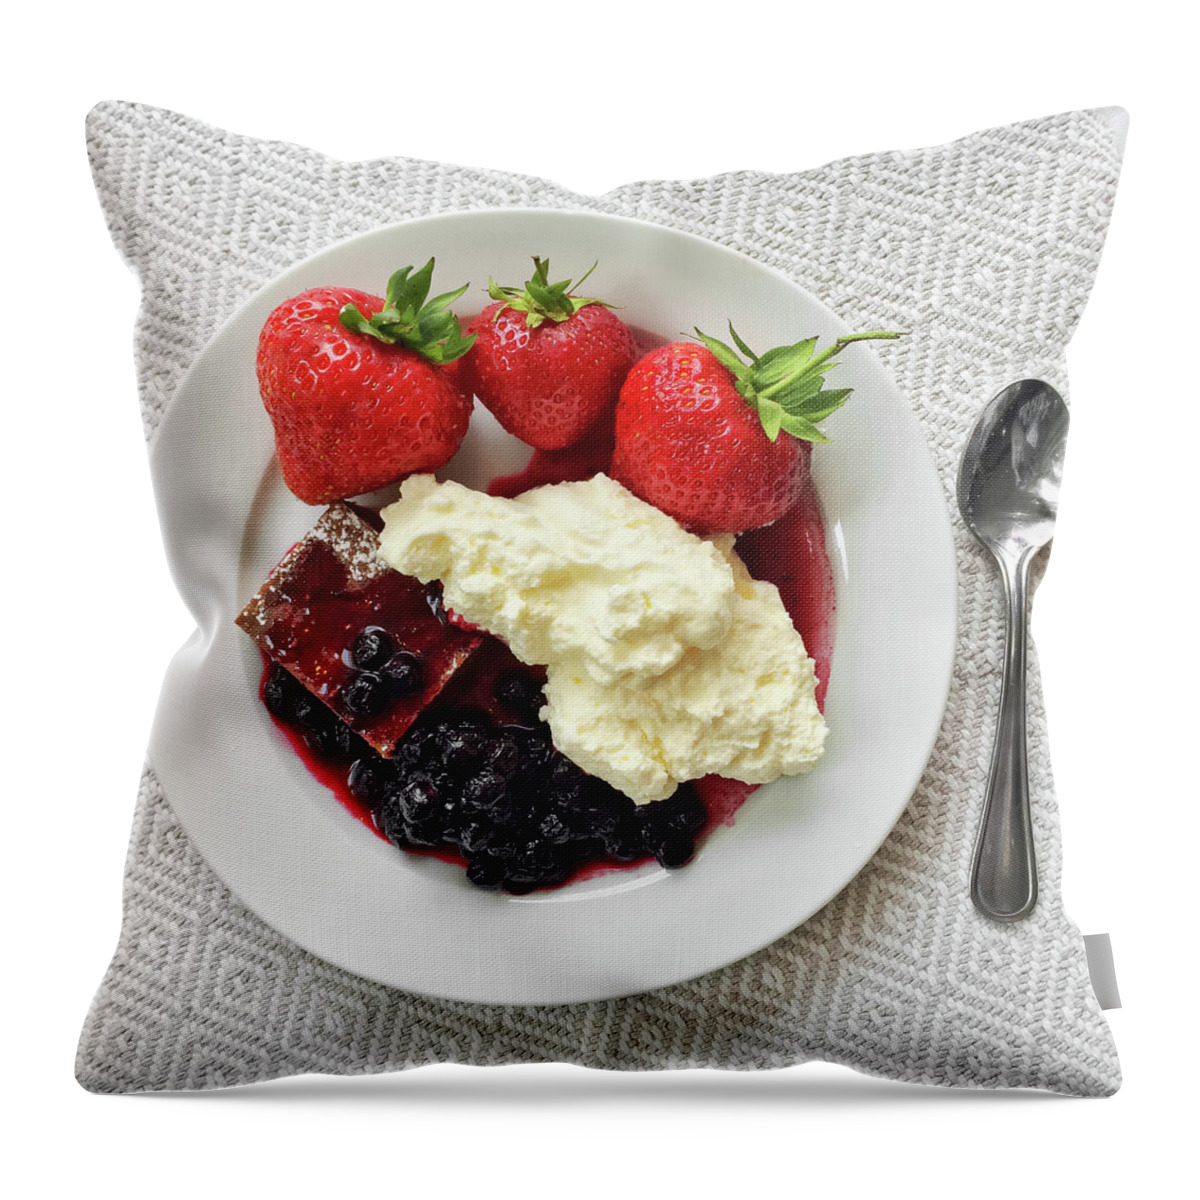 Dessert Throw Pillow featuring the photograph Dessert with strawberries and whipped cream by GoodMood Art